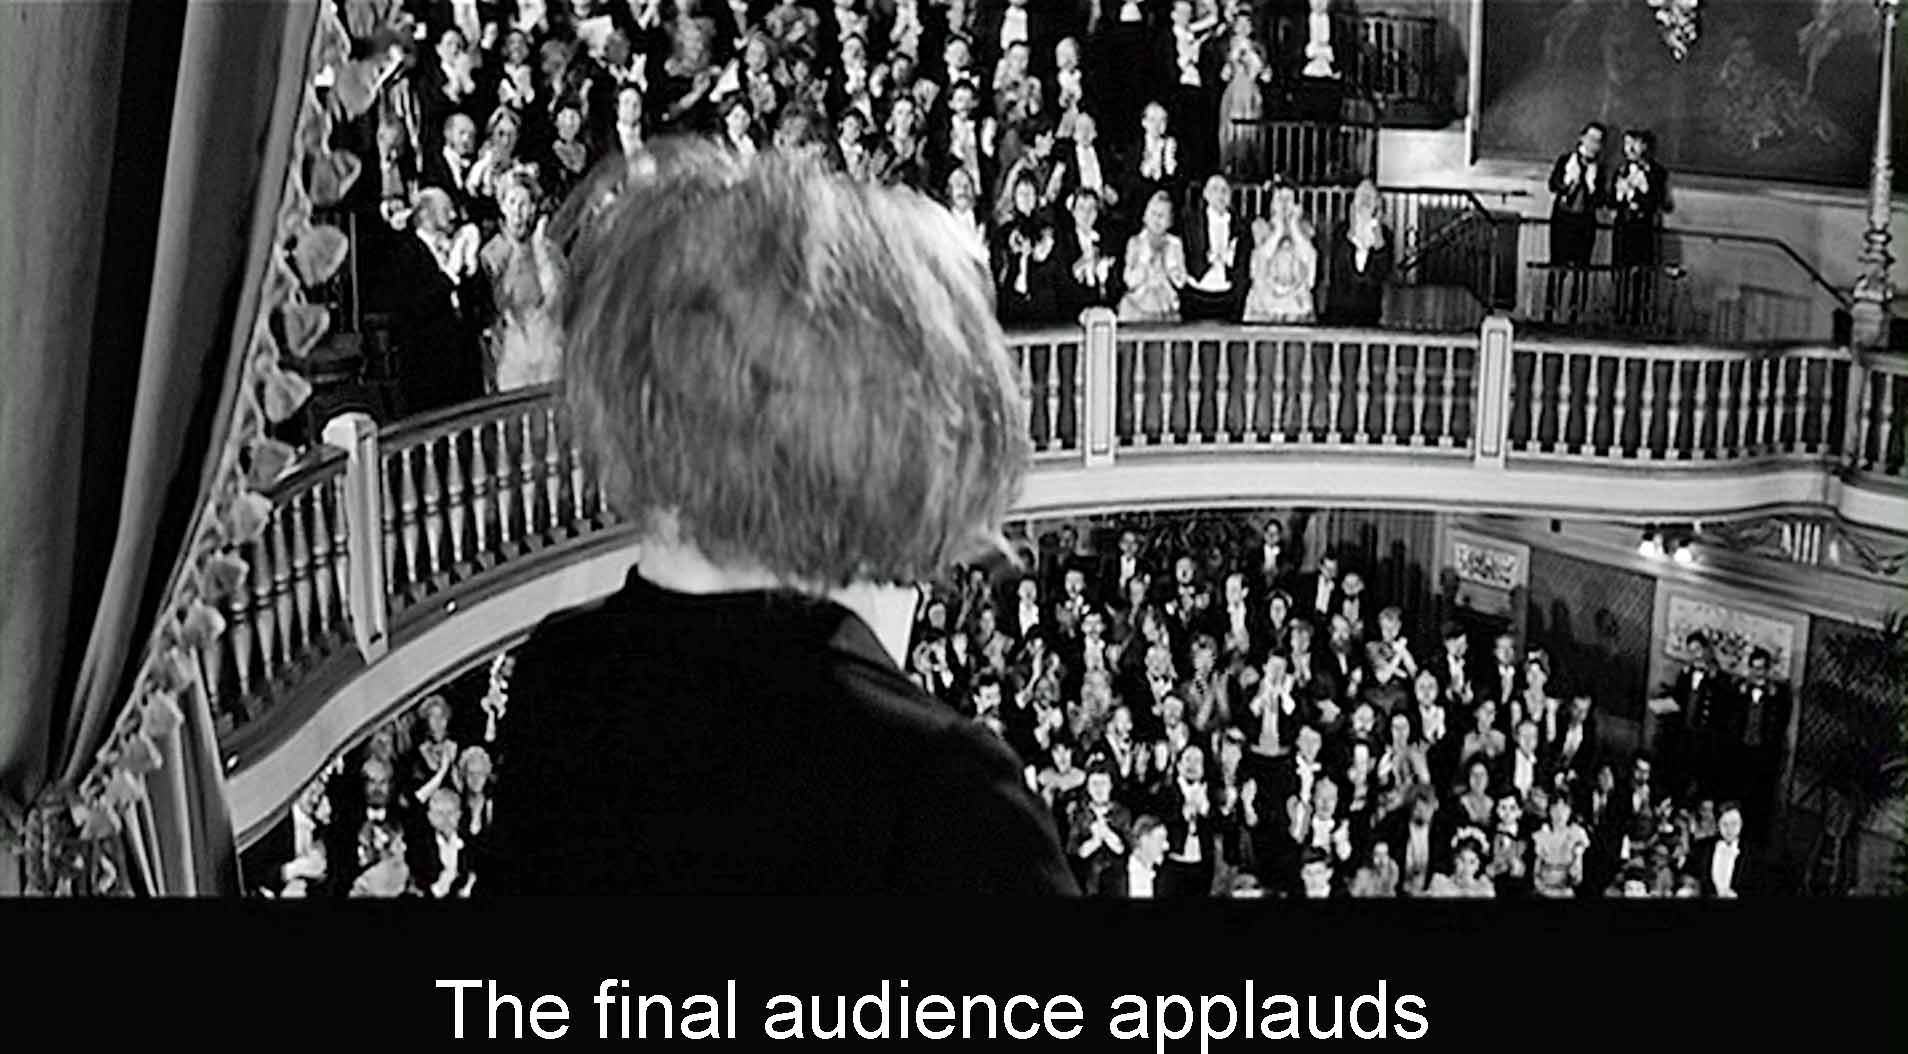  The final audience applauds